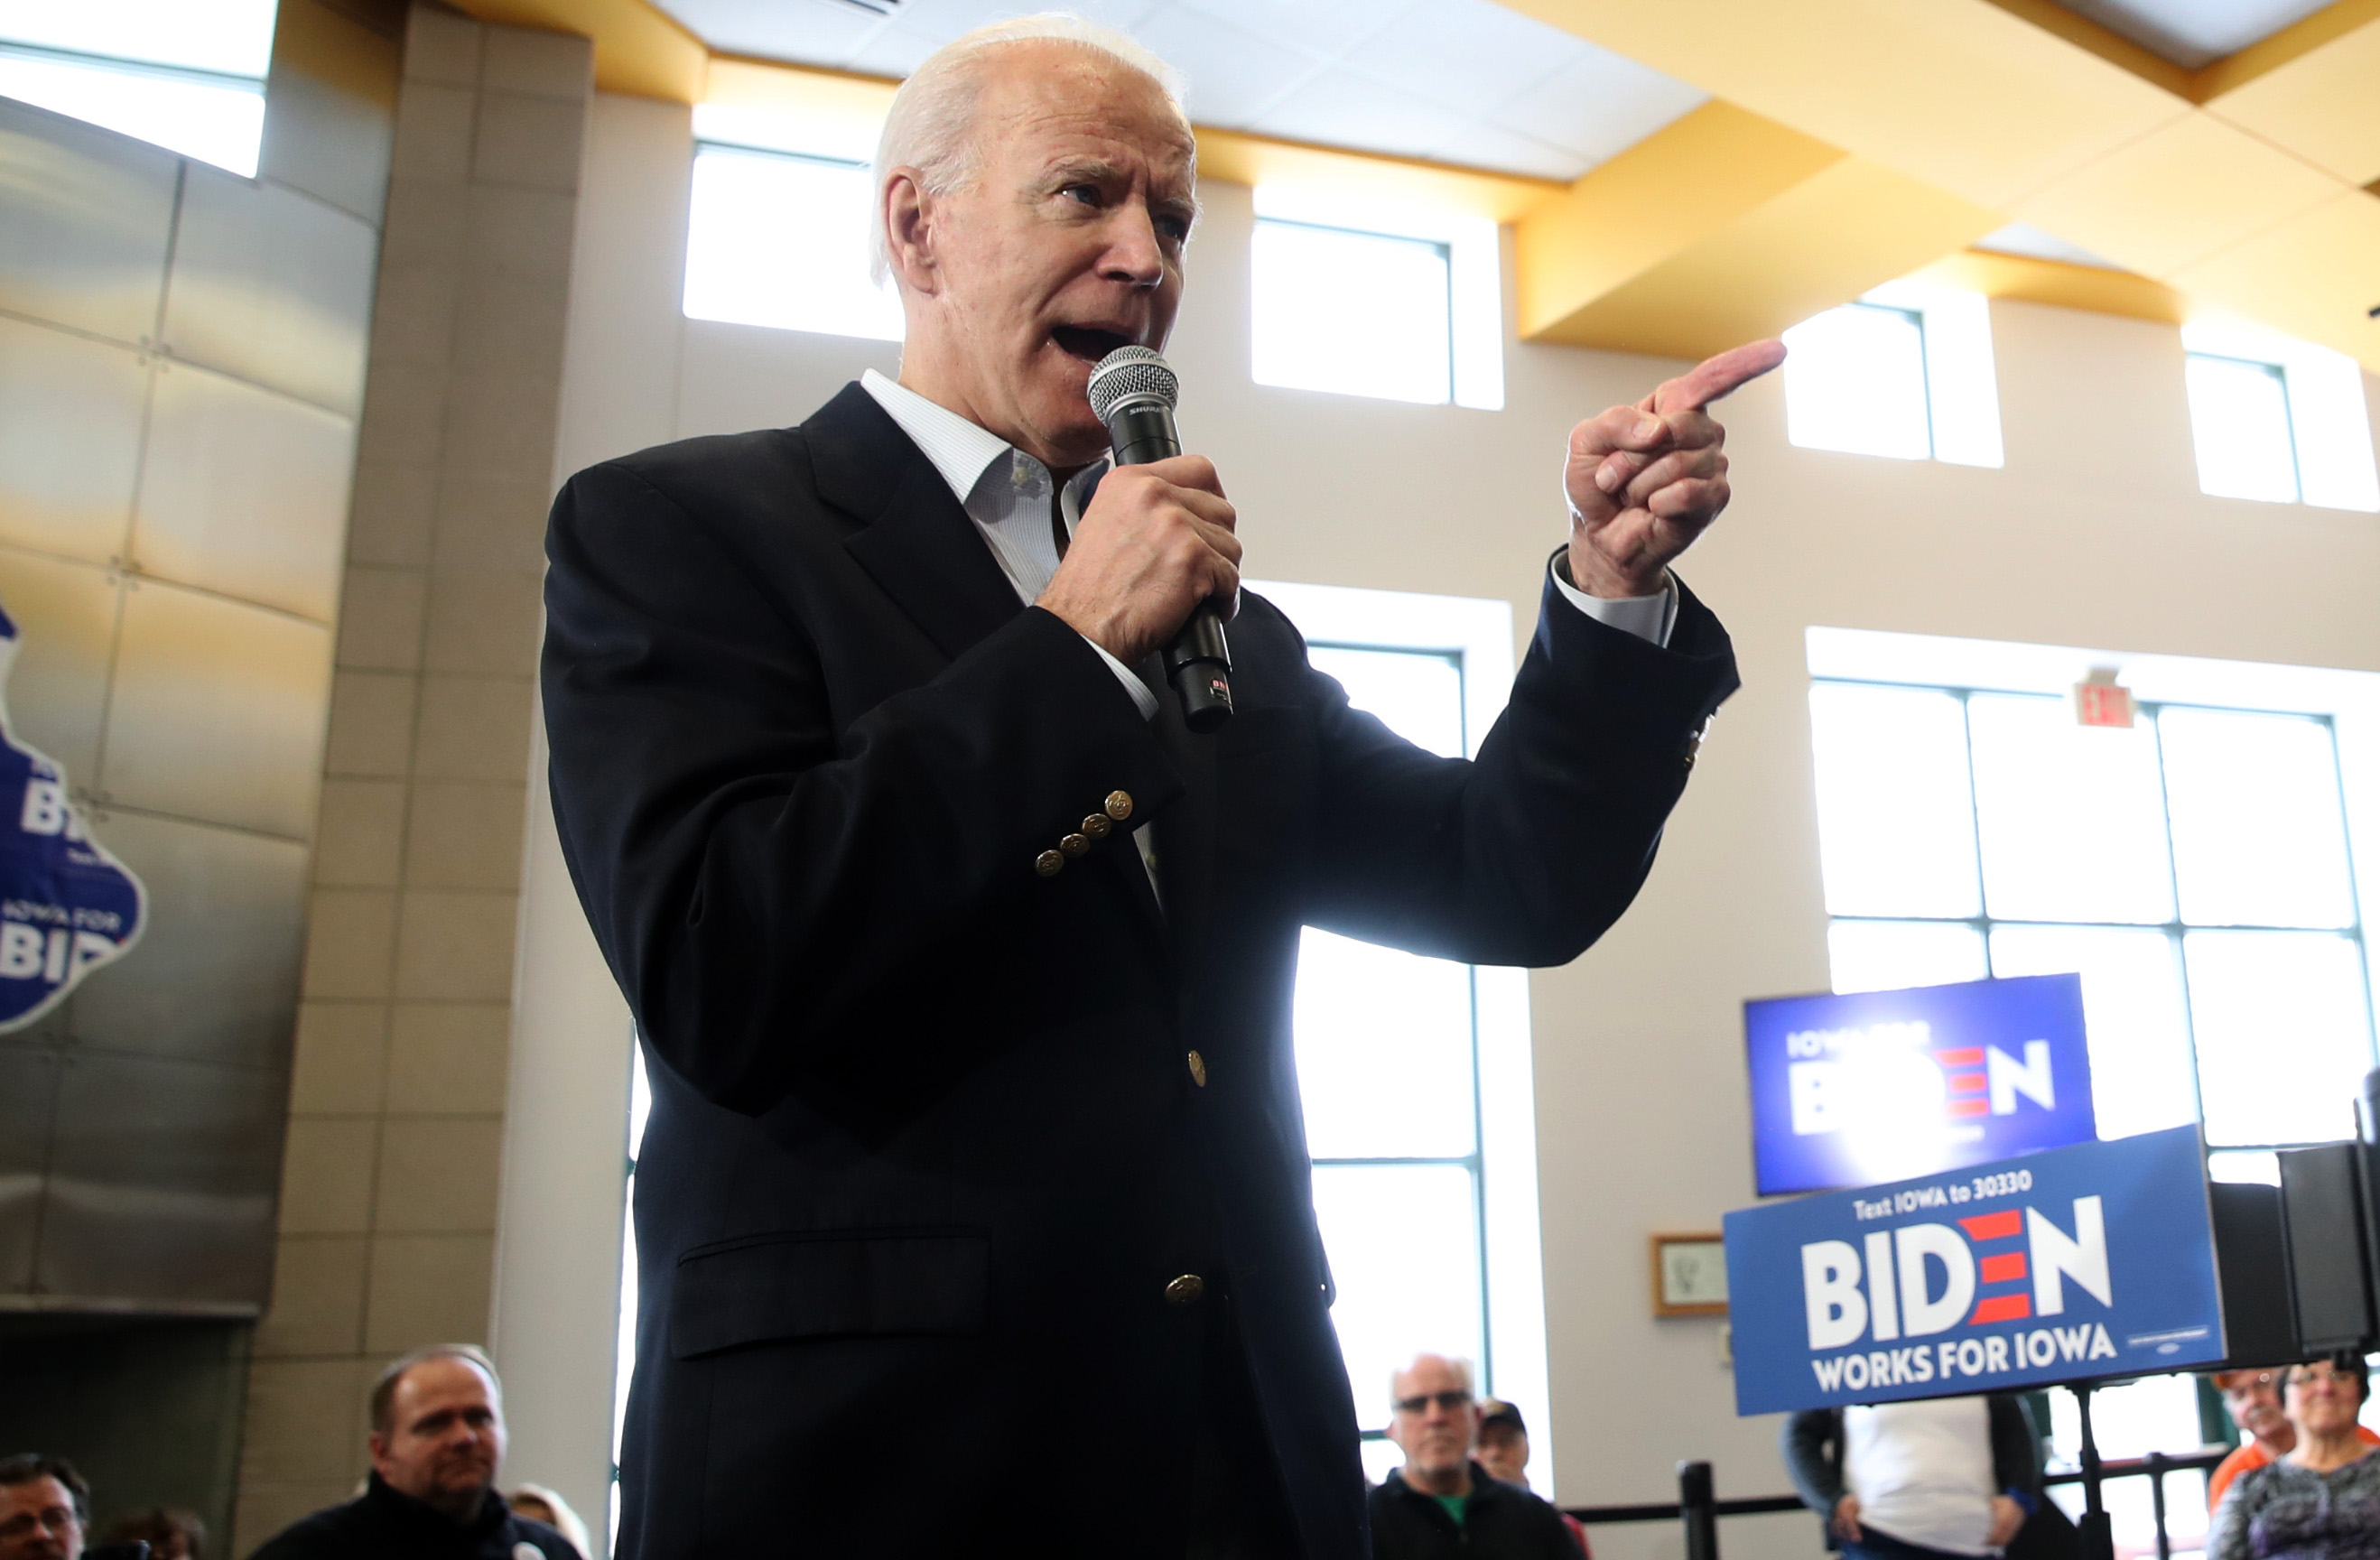 DUBUQUE, IOWA - FEBRUARY 02: Democratic presidential candidate former Vice President Joe Biden speaks during a campaign event on February 02, 2020 in Dubuque, Iowa. With one day to go before the 2020 Iowa Presidential caucuses, Joe Biden is campaigning across Iowa. (Photo by Justin Sullivan/Getty Images)